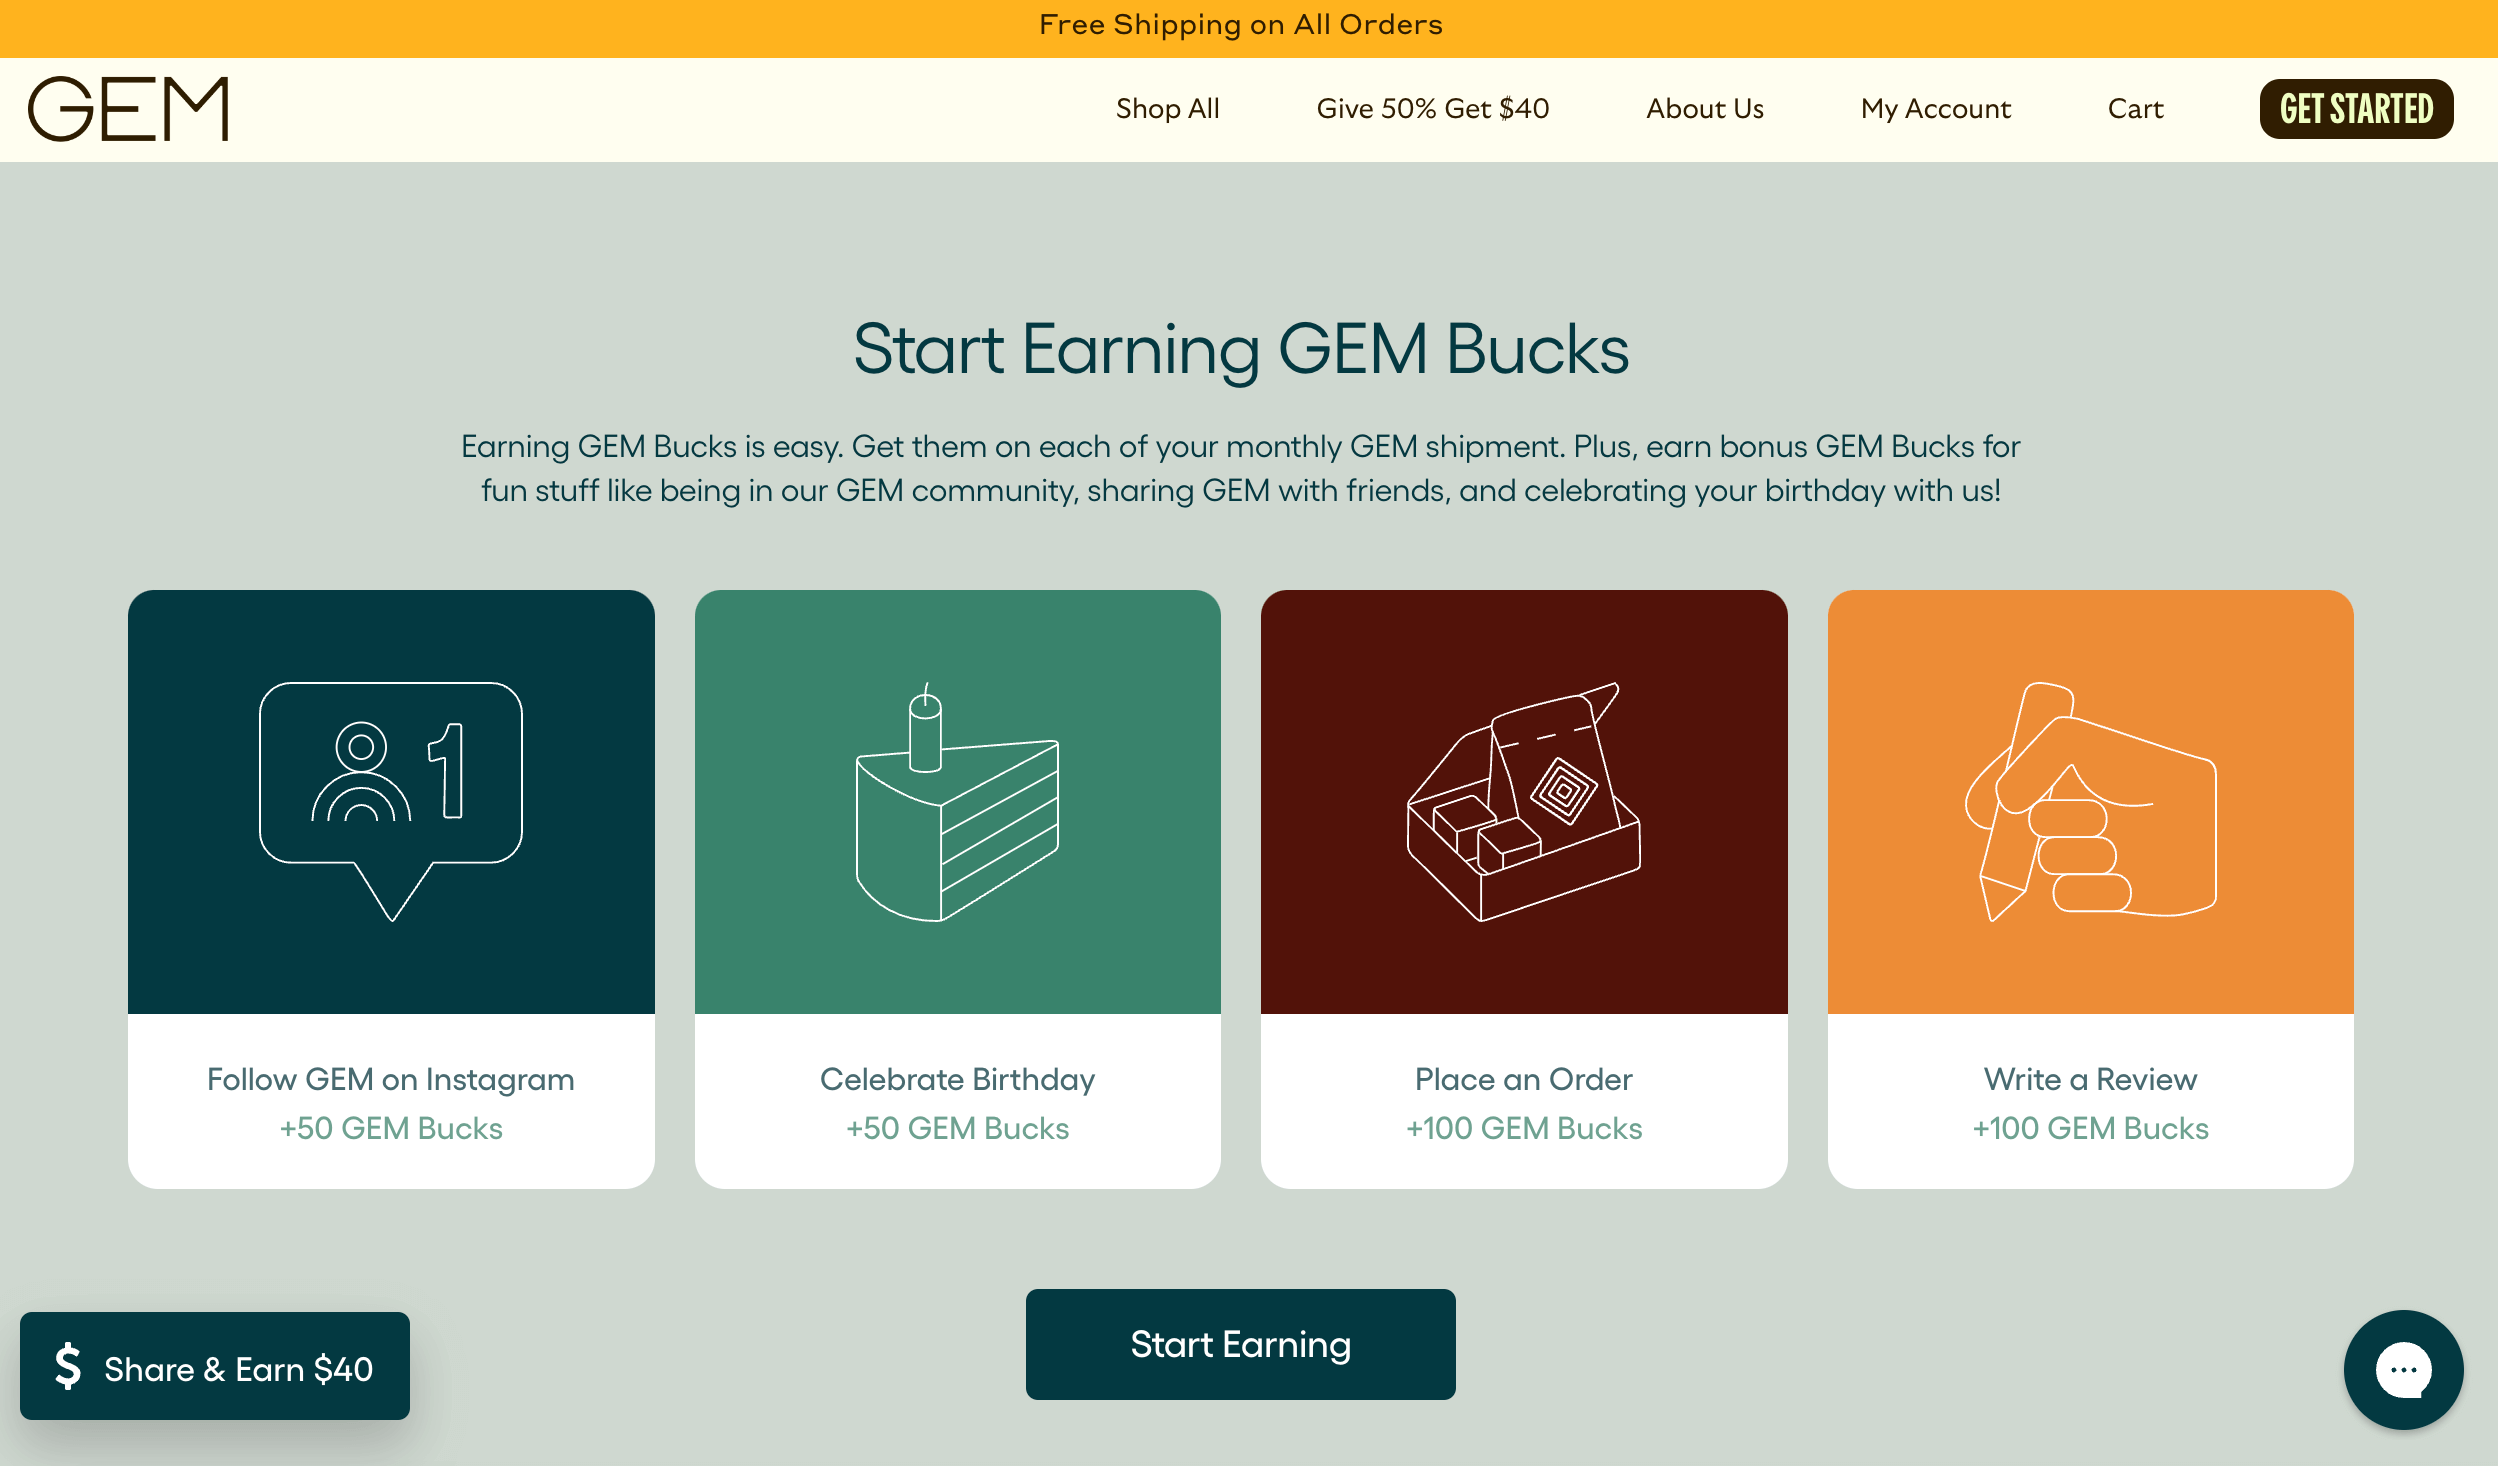 GEM’s rewards program explainer page shows the ways customers earn points including following on Instagram, celebrating a birthday, making a purchase, and writing a review. 